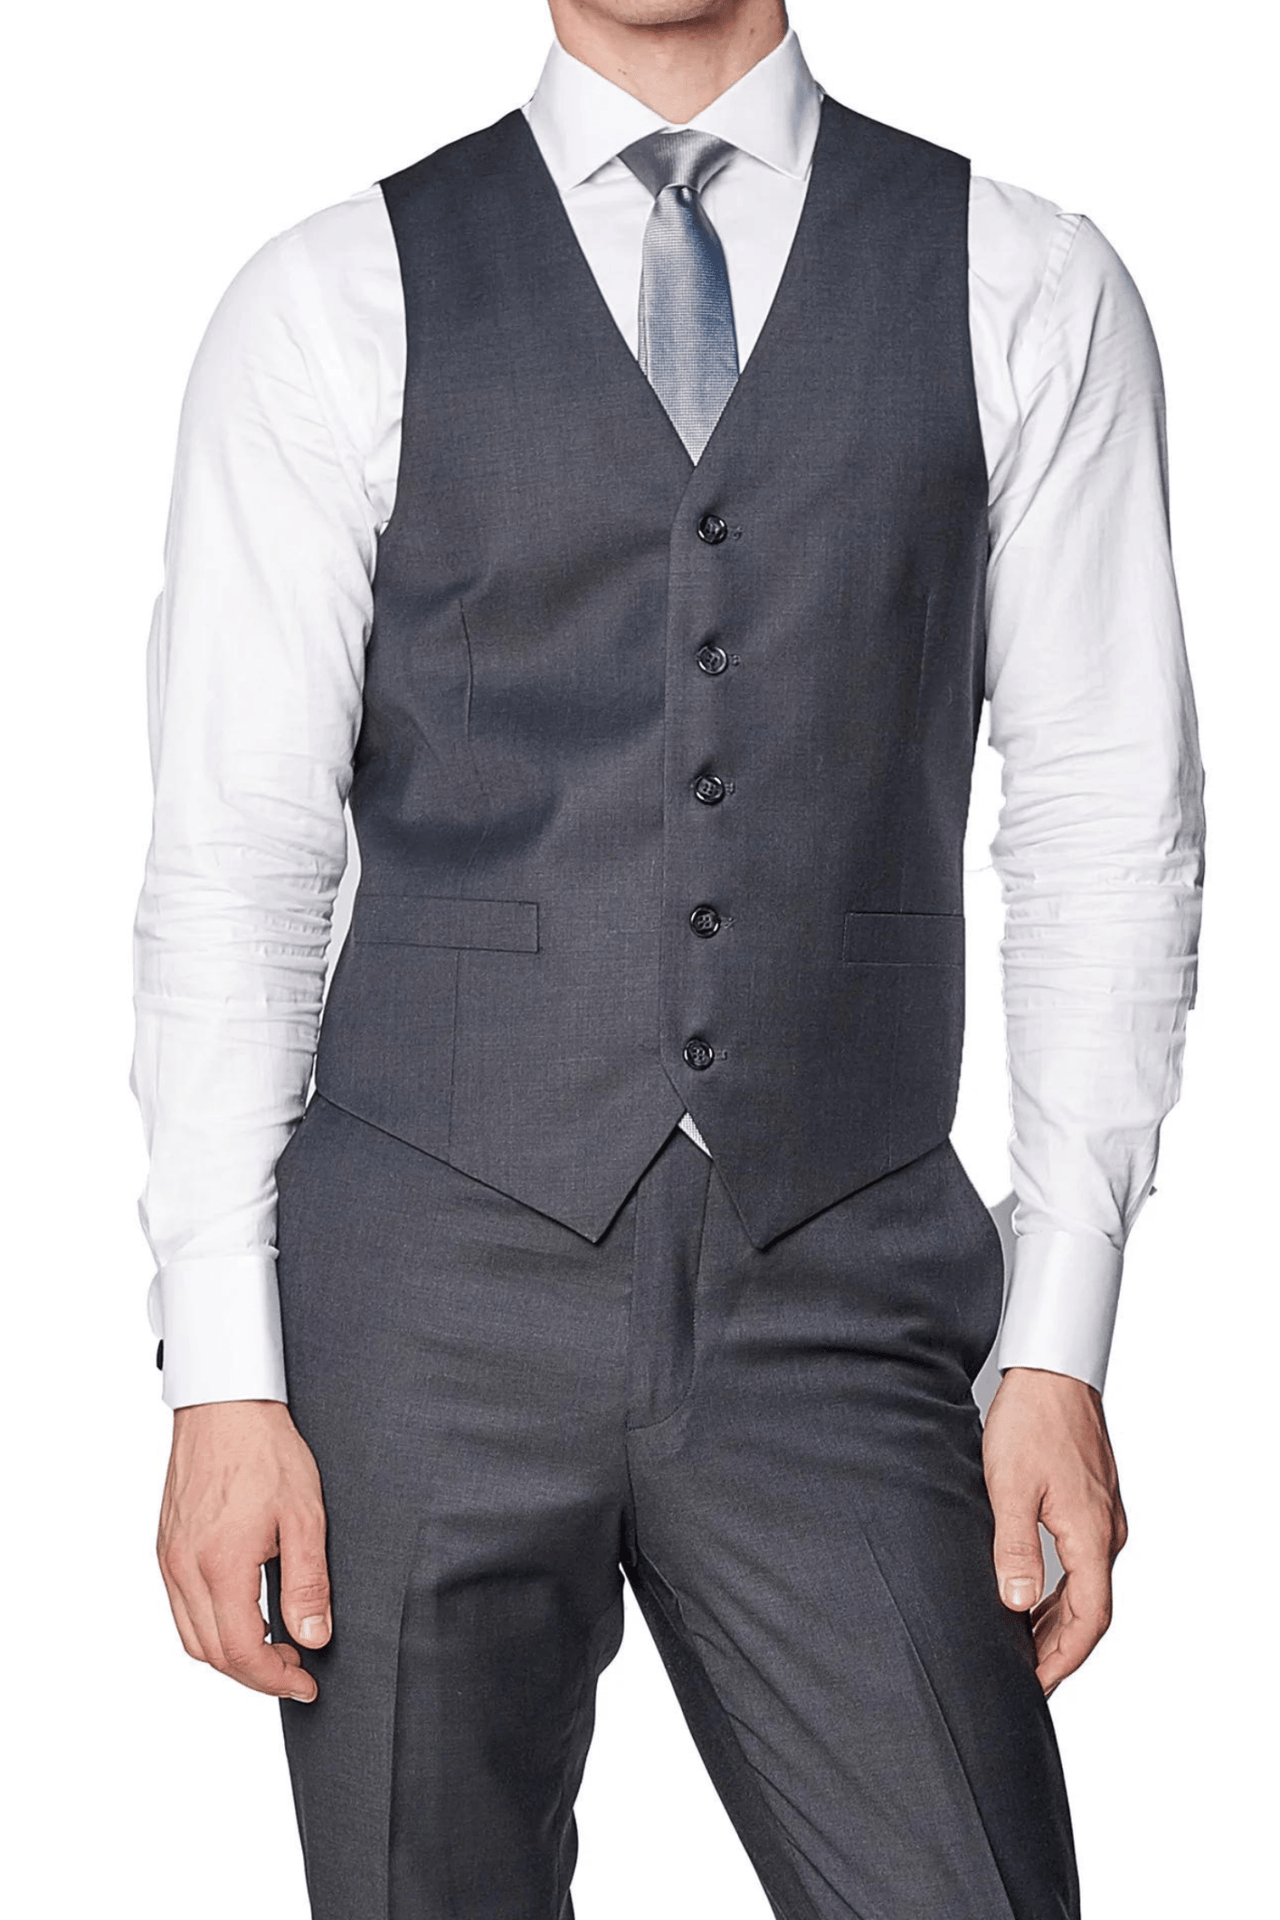 Charcoal Luxurious Italian Wool Collection Vest - Tomasso Black